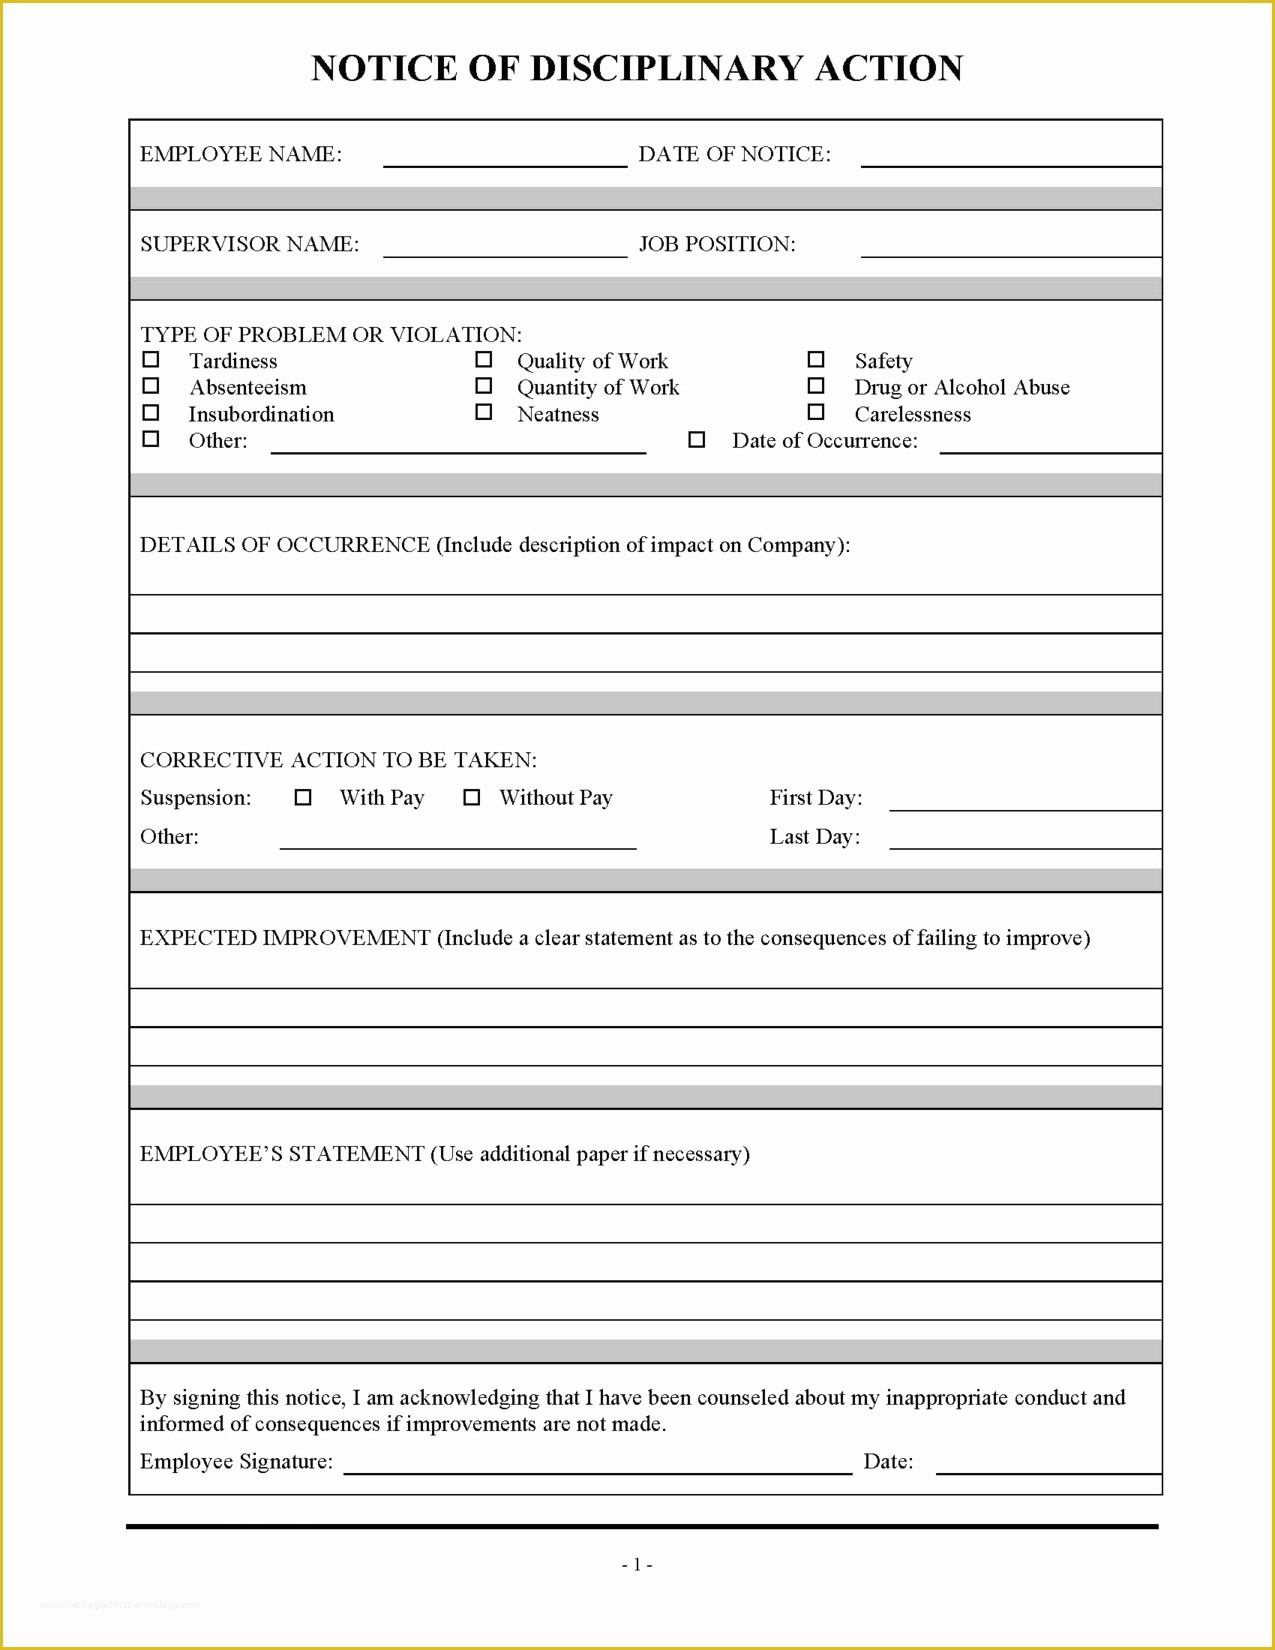 Hr Documents Templates Free Of Employee Employee Disciplinary Action form